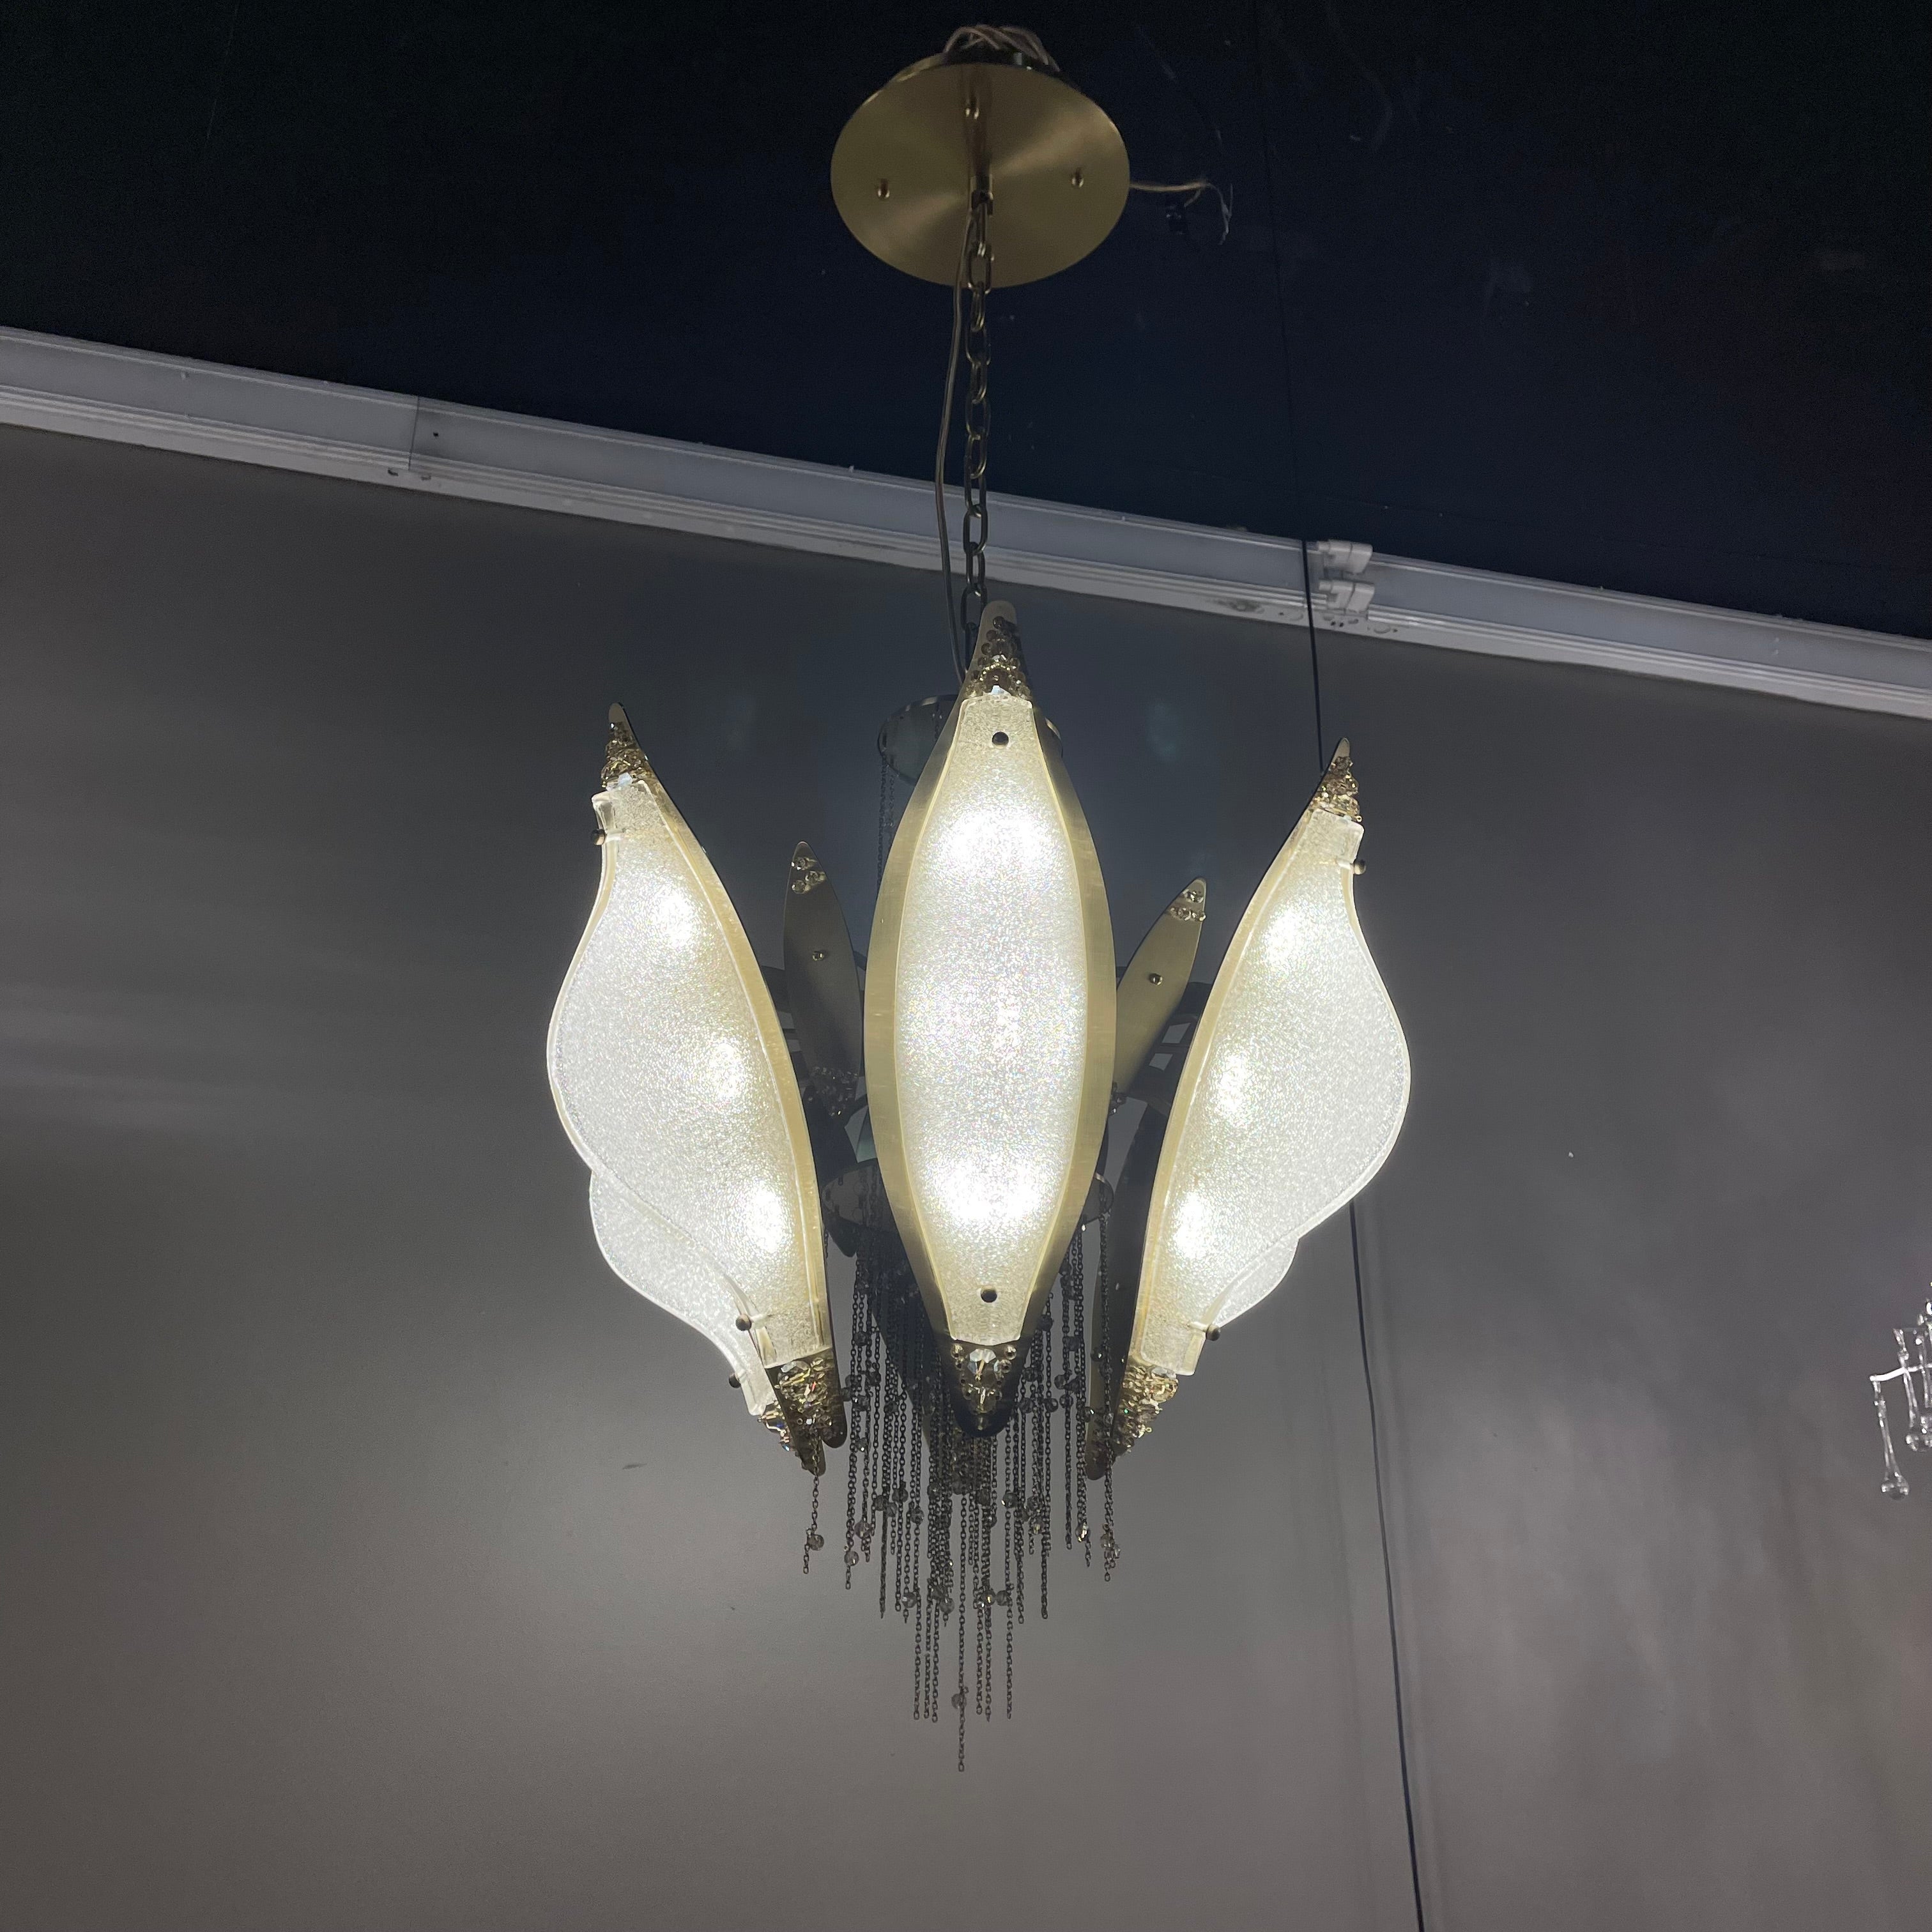 Aria Closed-Flower Crystal Murano Chandelier - Italian Concept - 